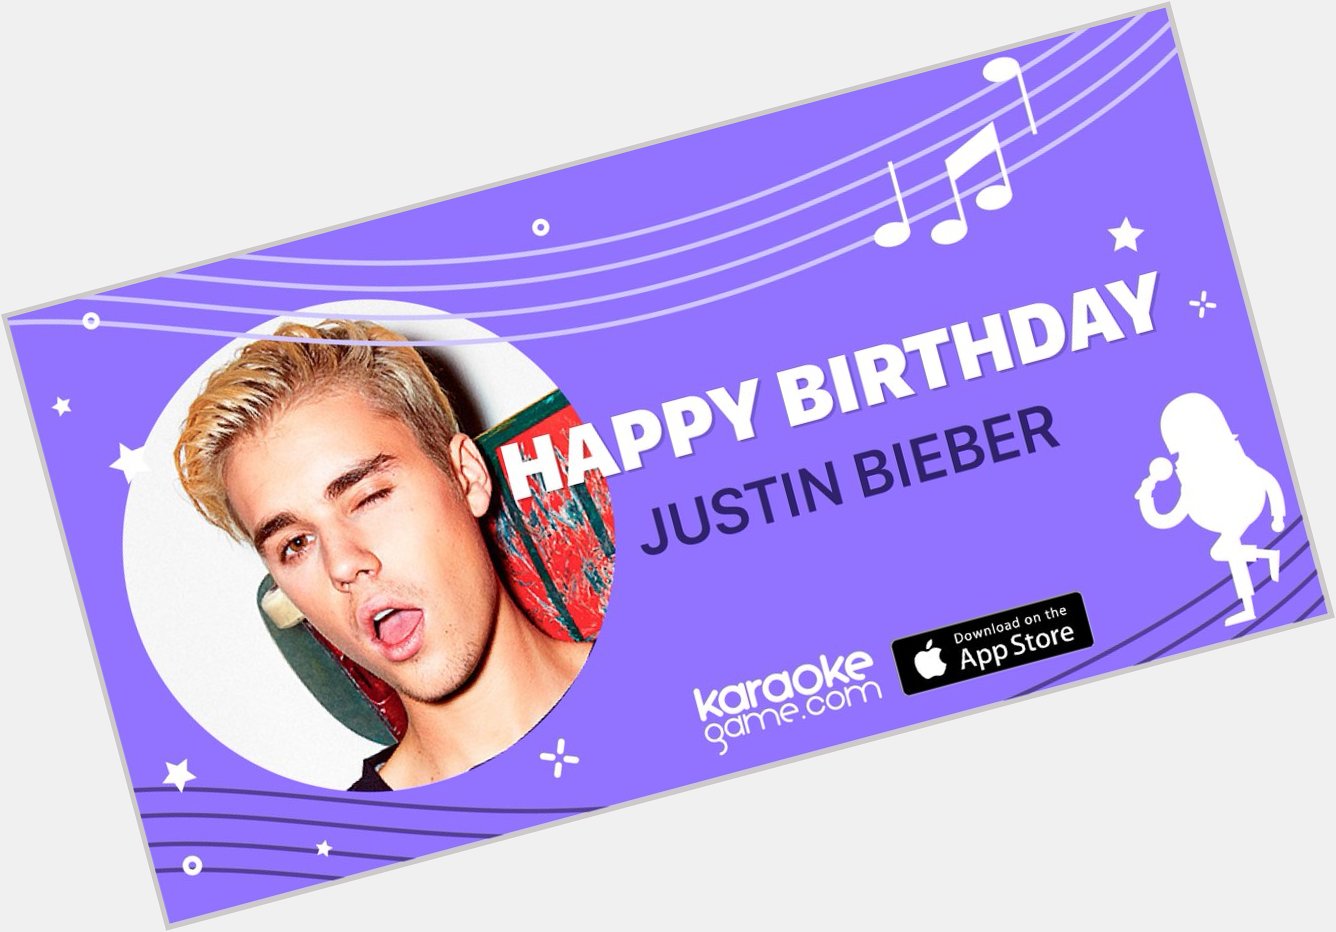 Happy Birthday ! Let\s celebrate by singing one of his best hits:  